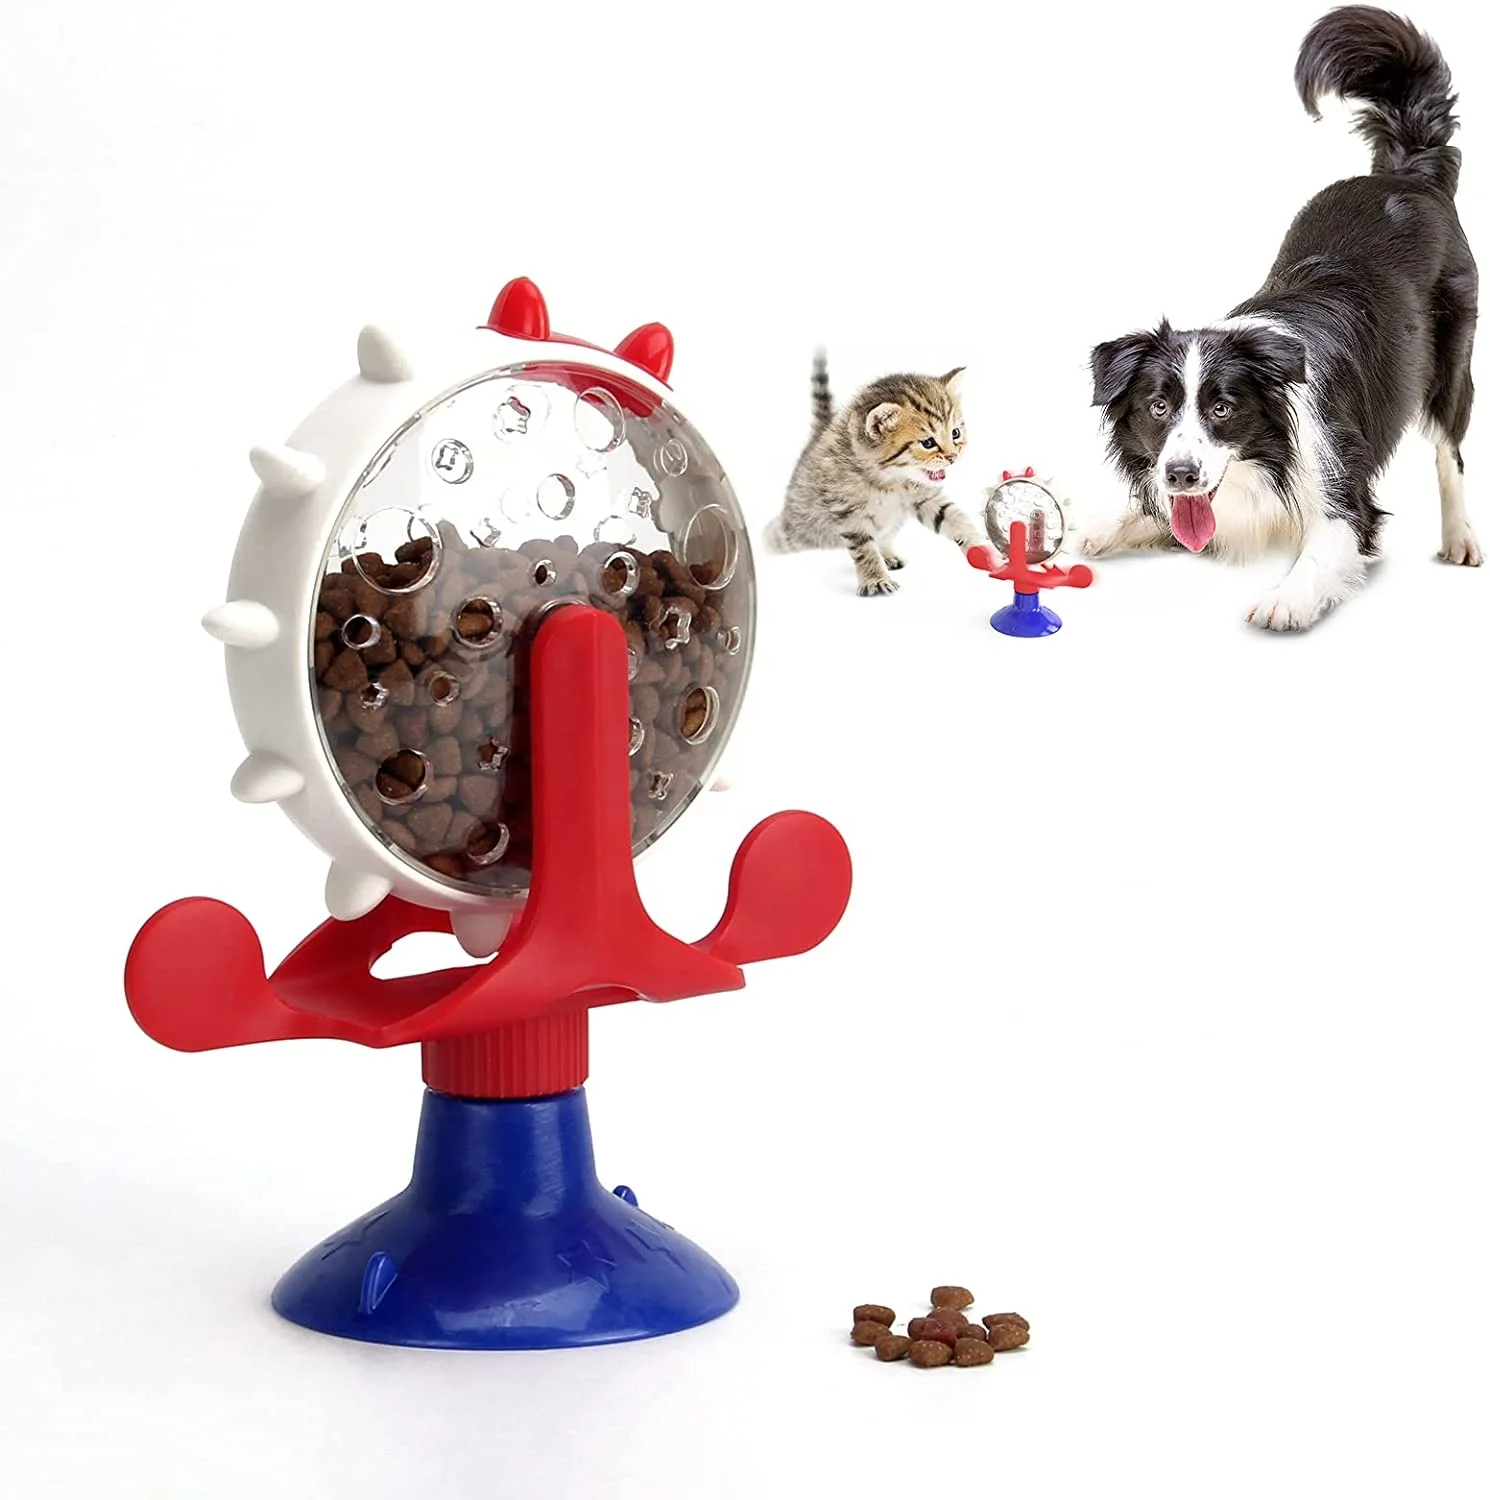 Fishbowl Cat Slow Feeder Toy - NEW!!!